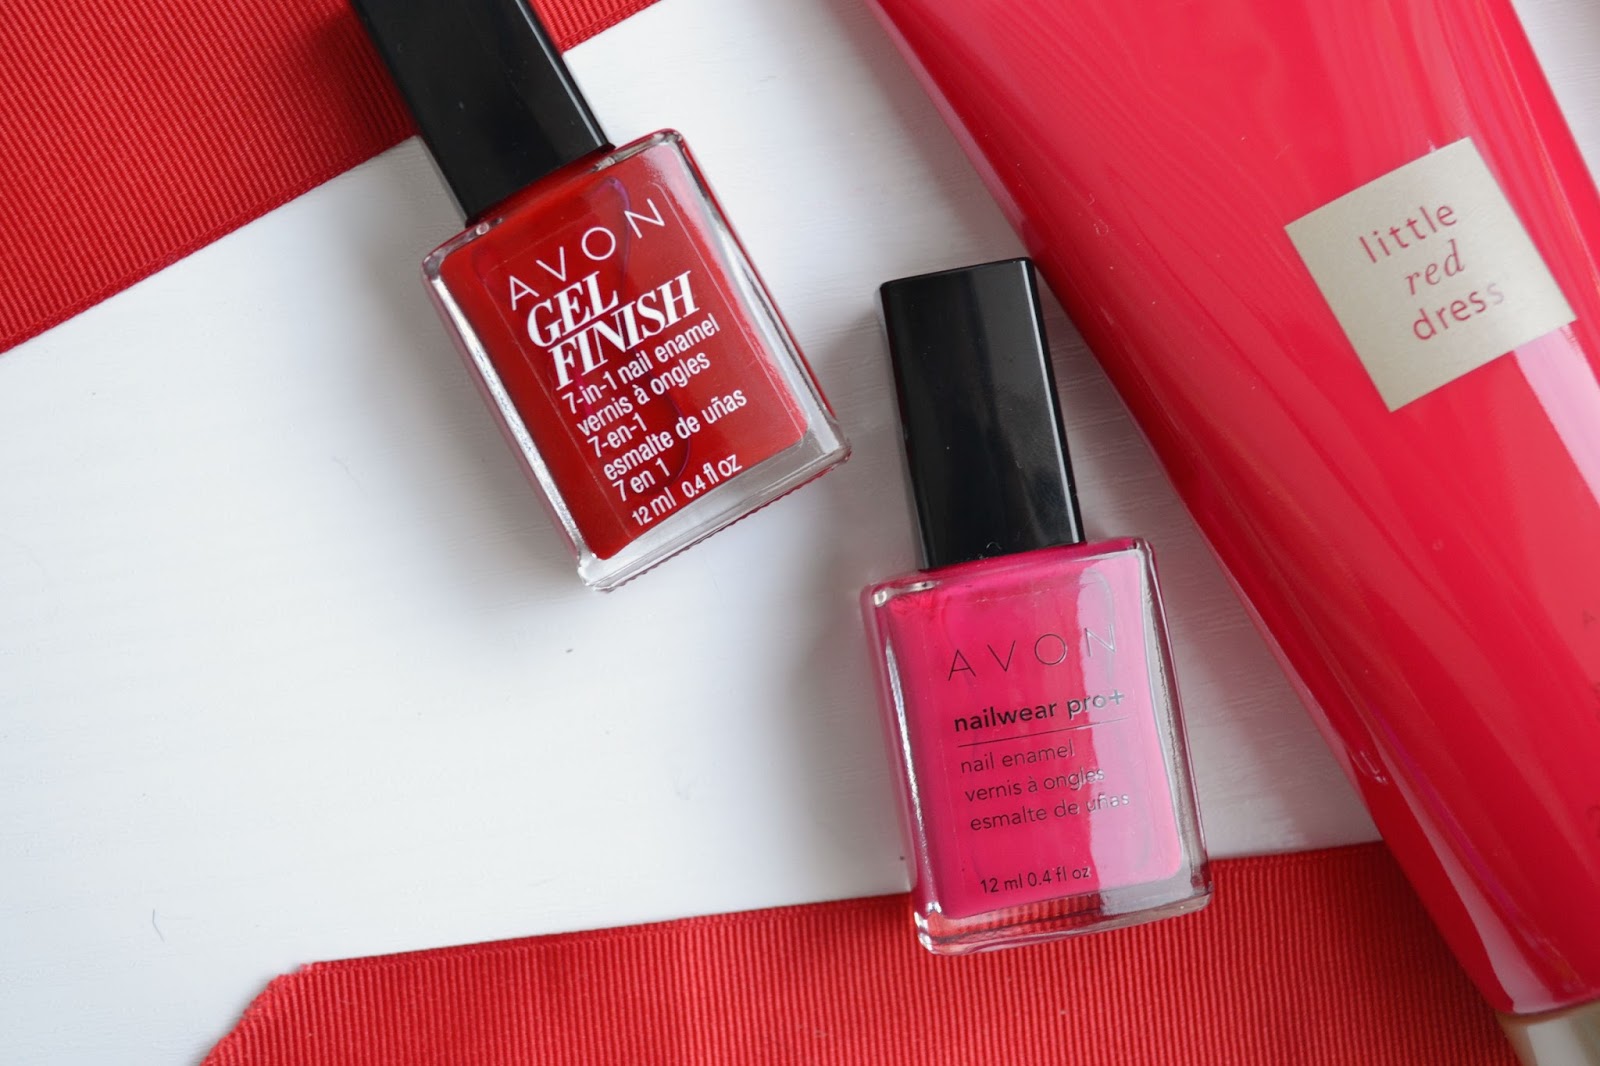 BATH & BODY | Valentine's Date Night Out with Avon's Little Red Dress ...